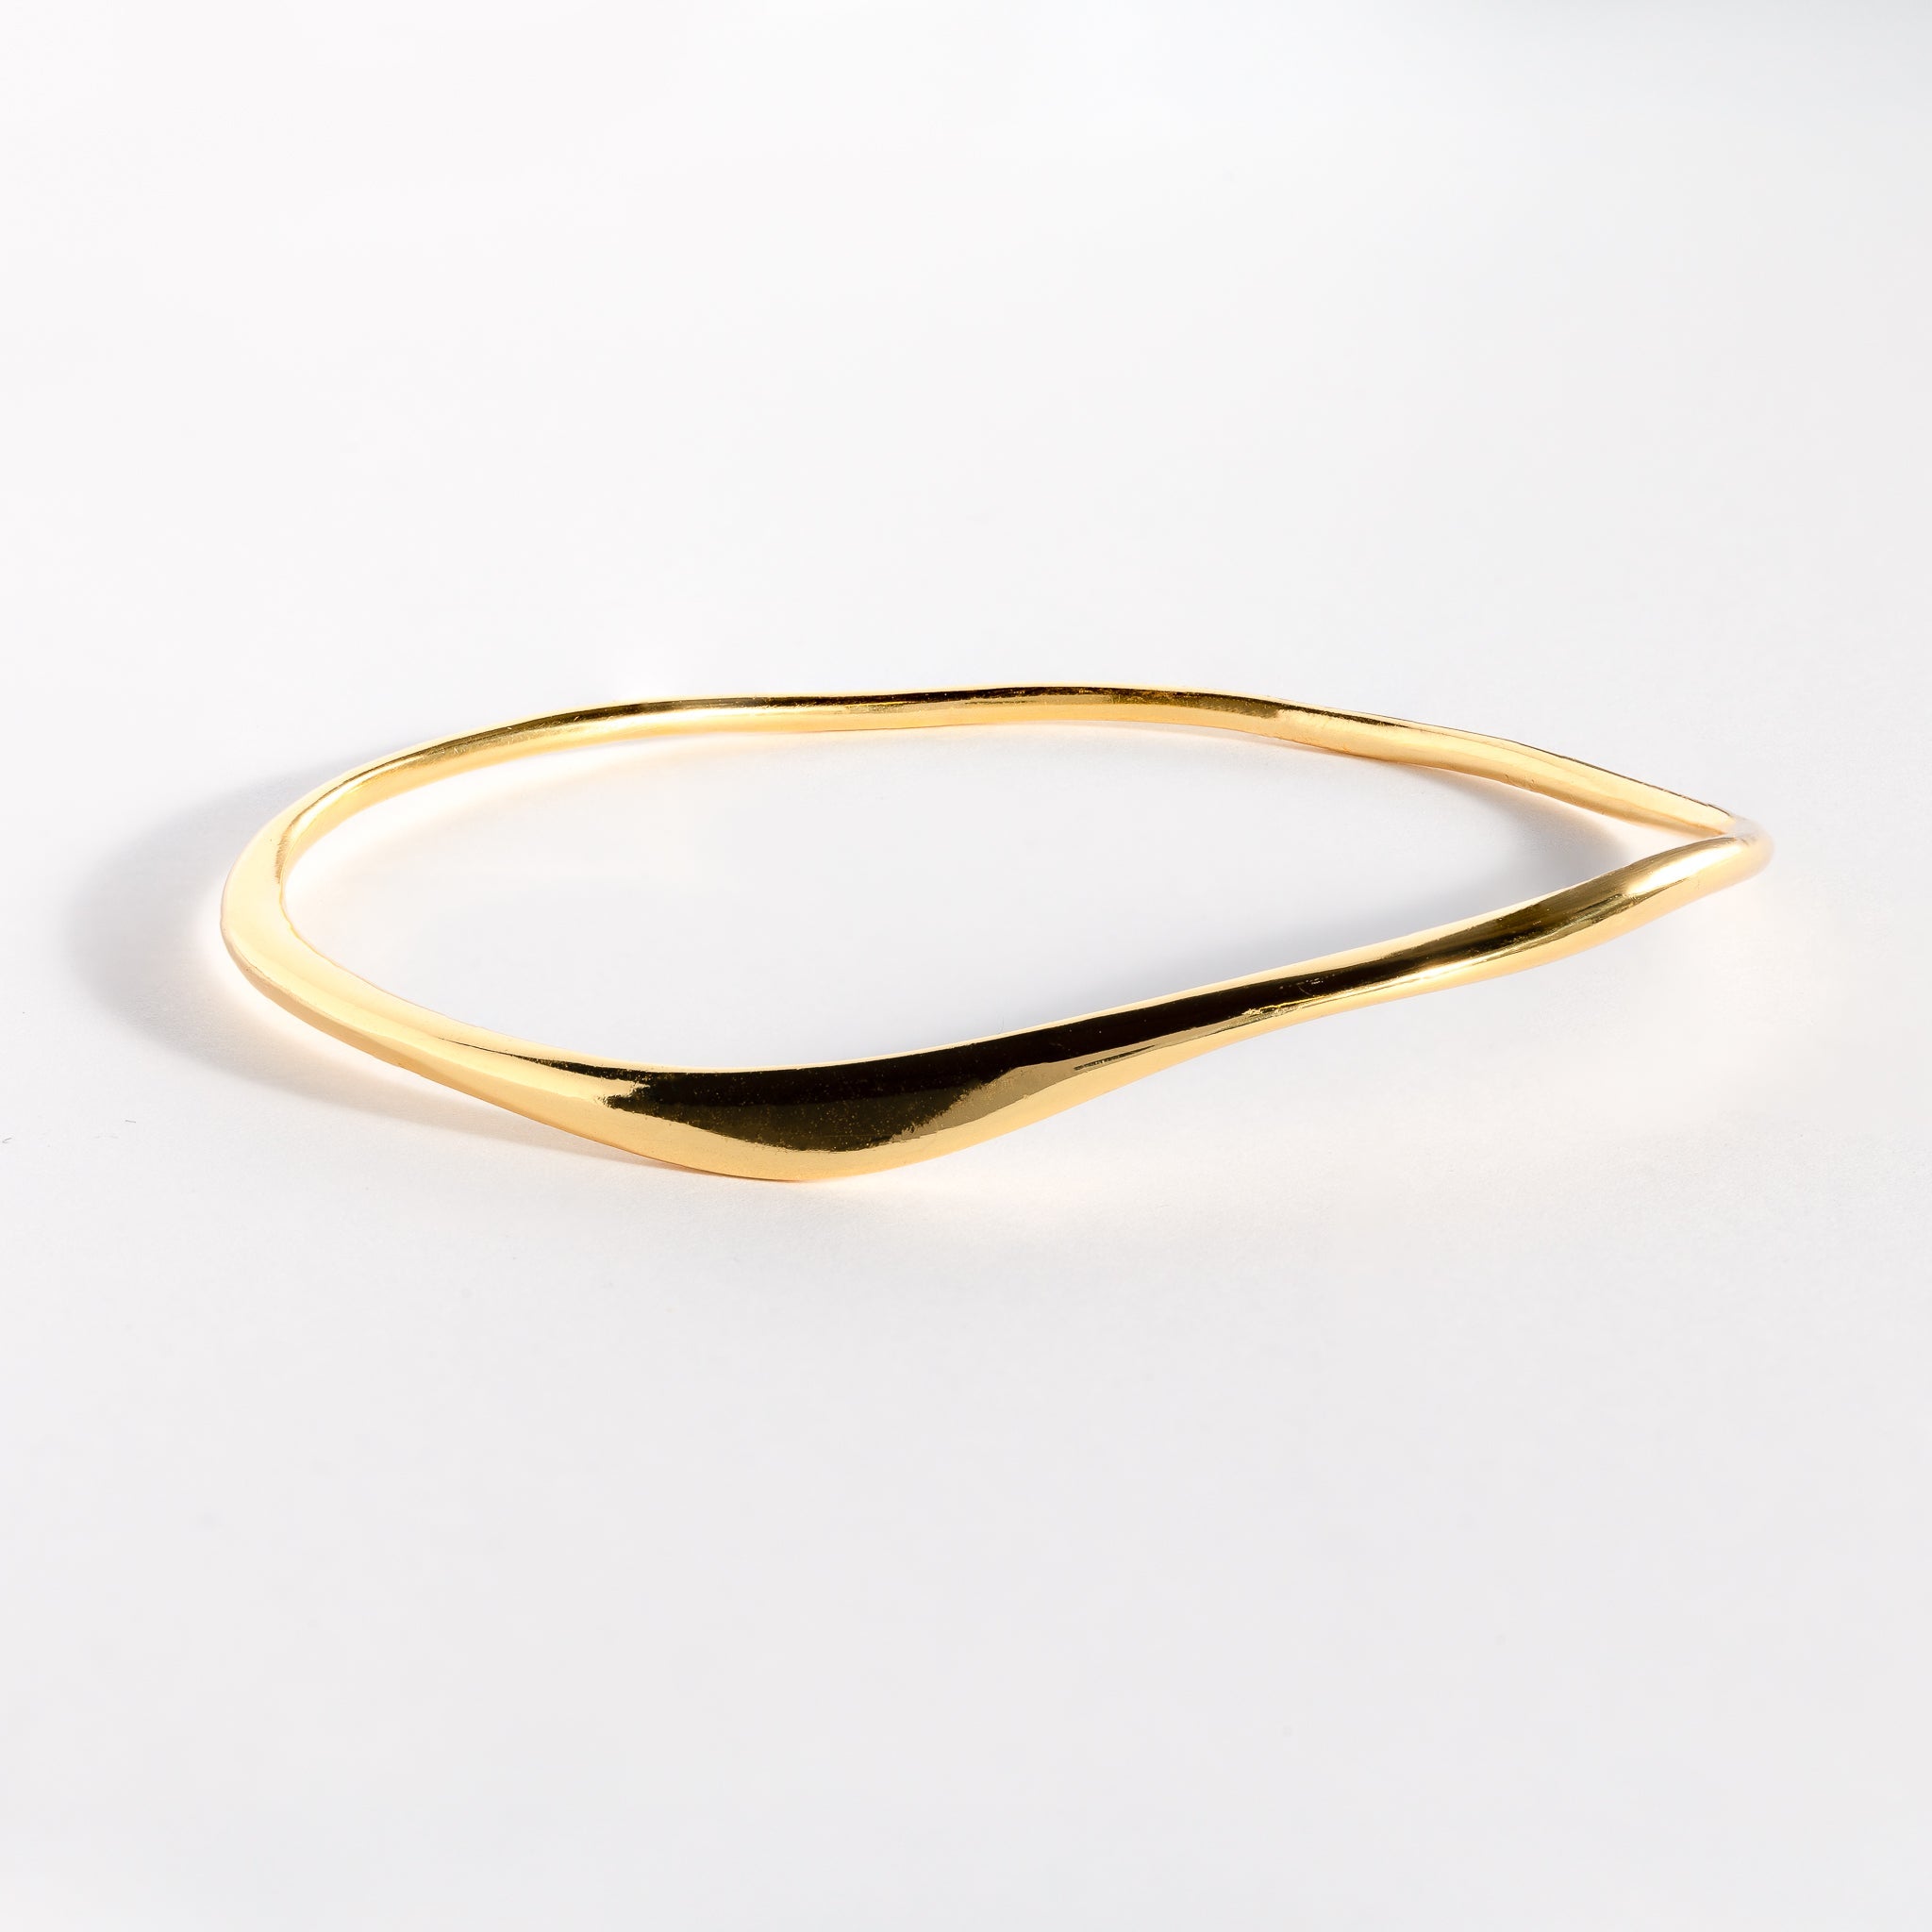 The Amble bangle is lovingly crafted in 18ct gold Vermeil and Sterling Silver.